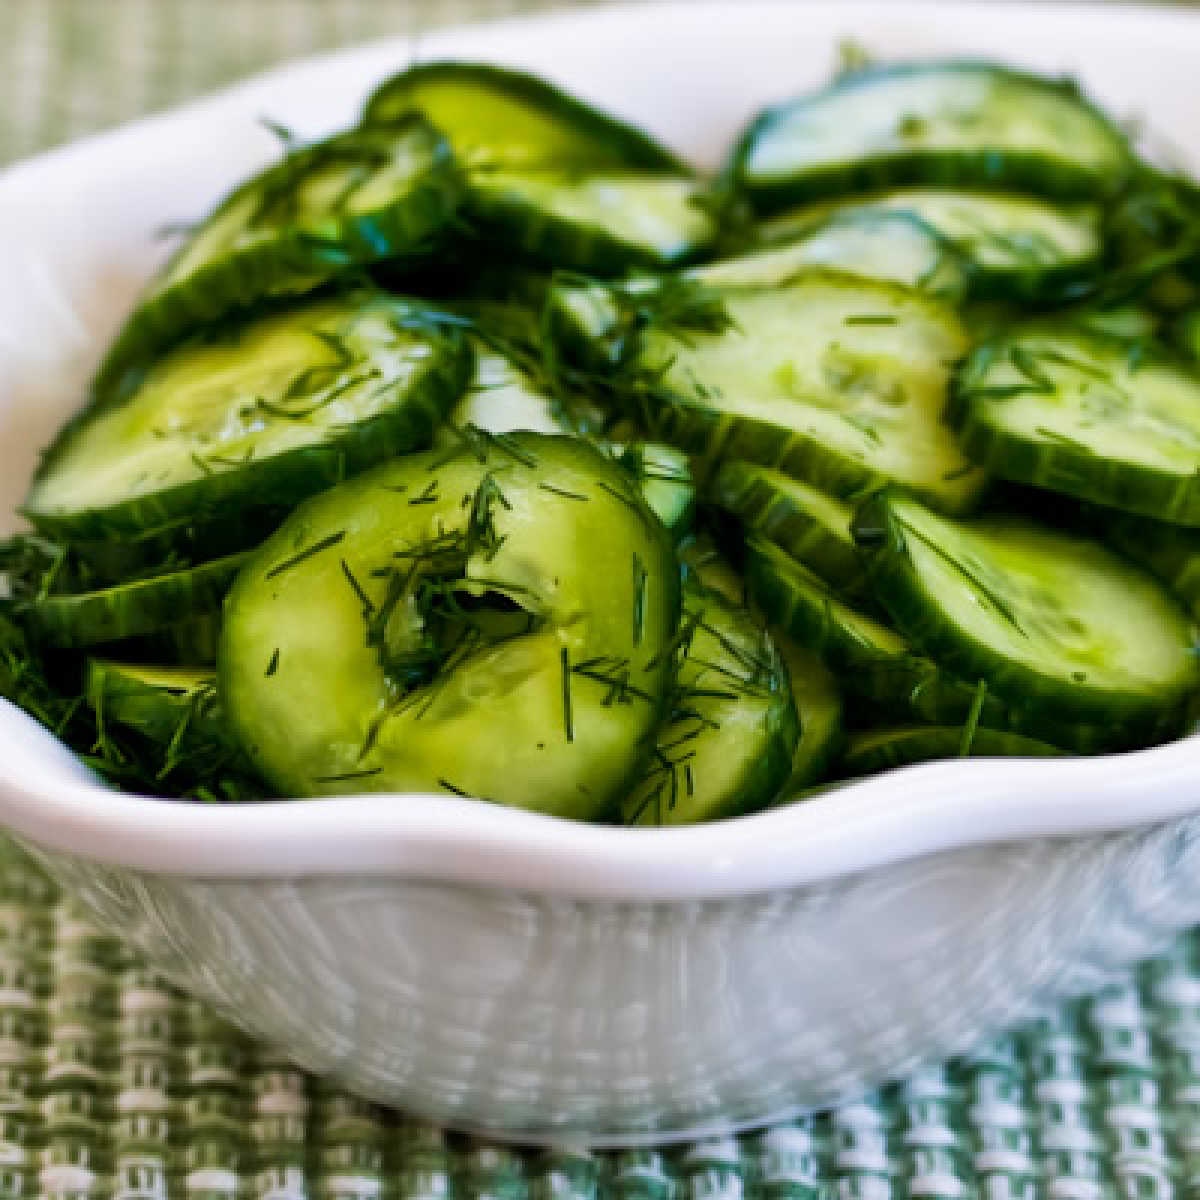 Sweet and sour cucumber salad shown in a serving bowl with dill